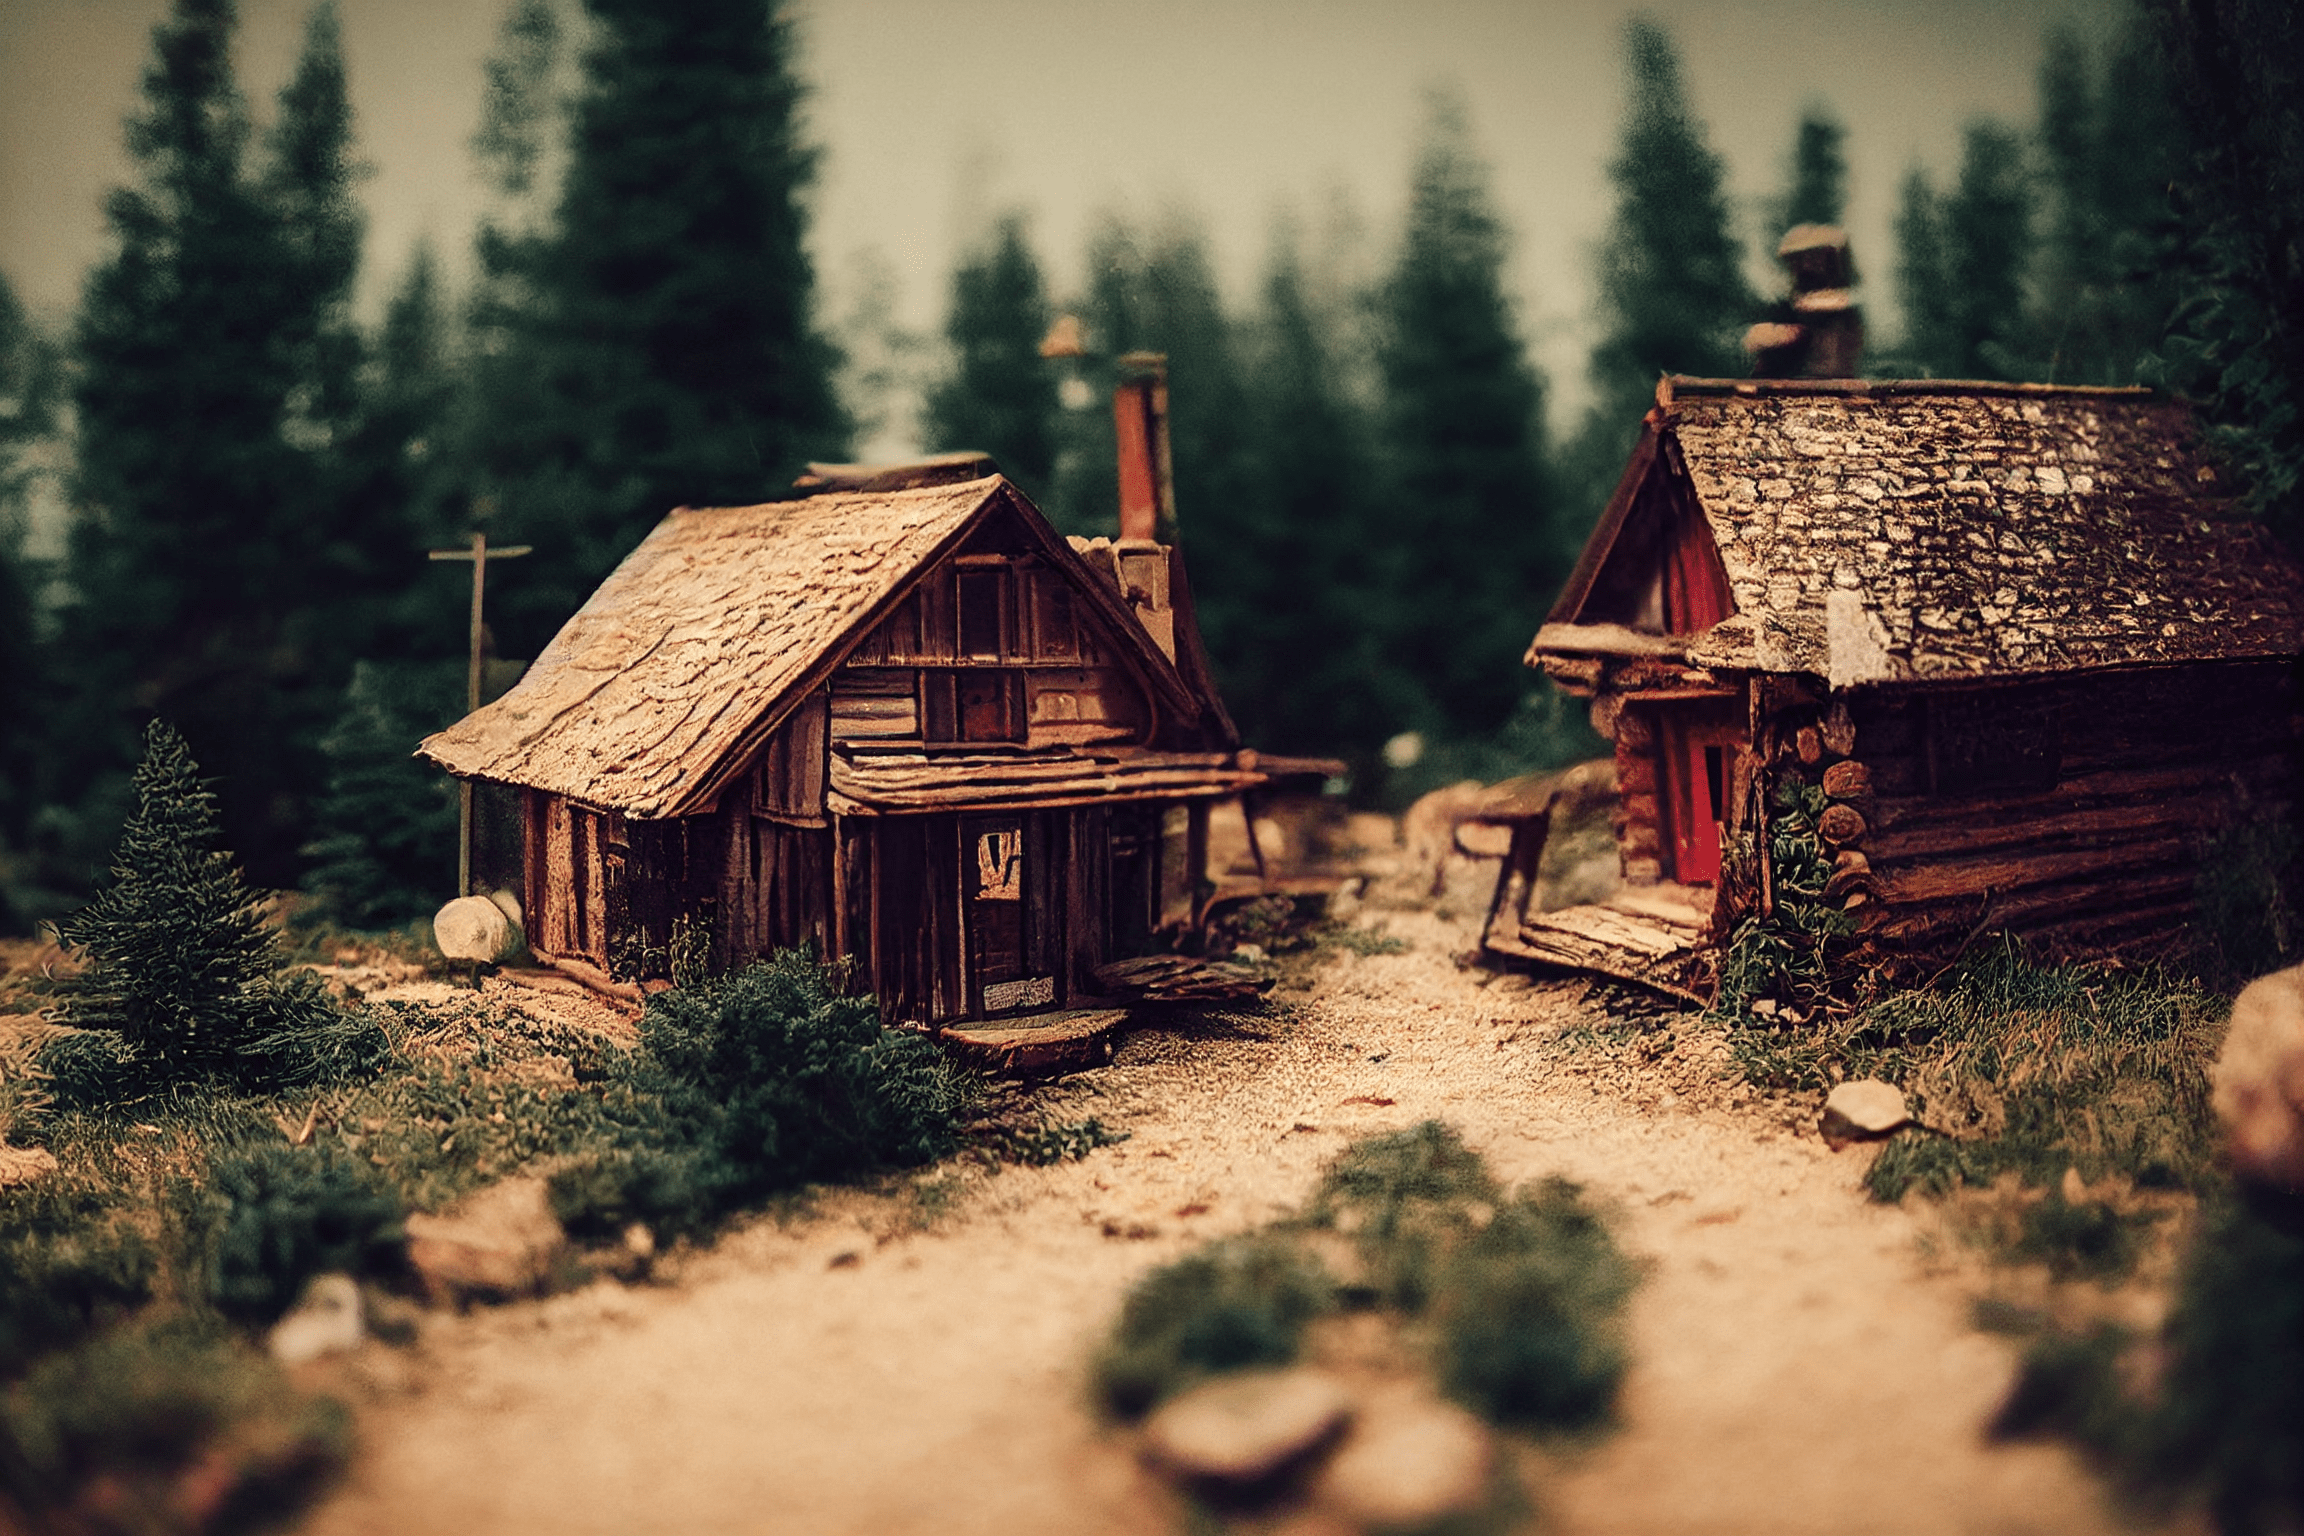 Way back a year ago – Cabincore miniature cabins